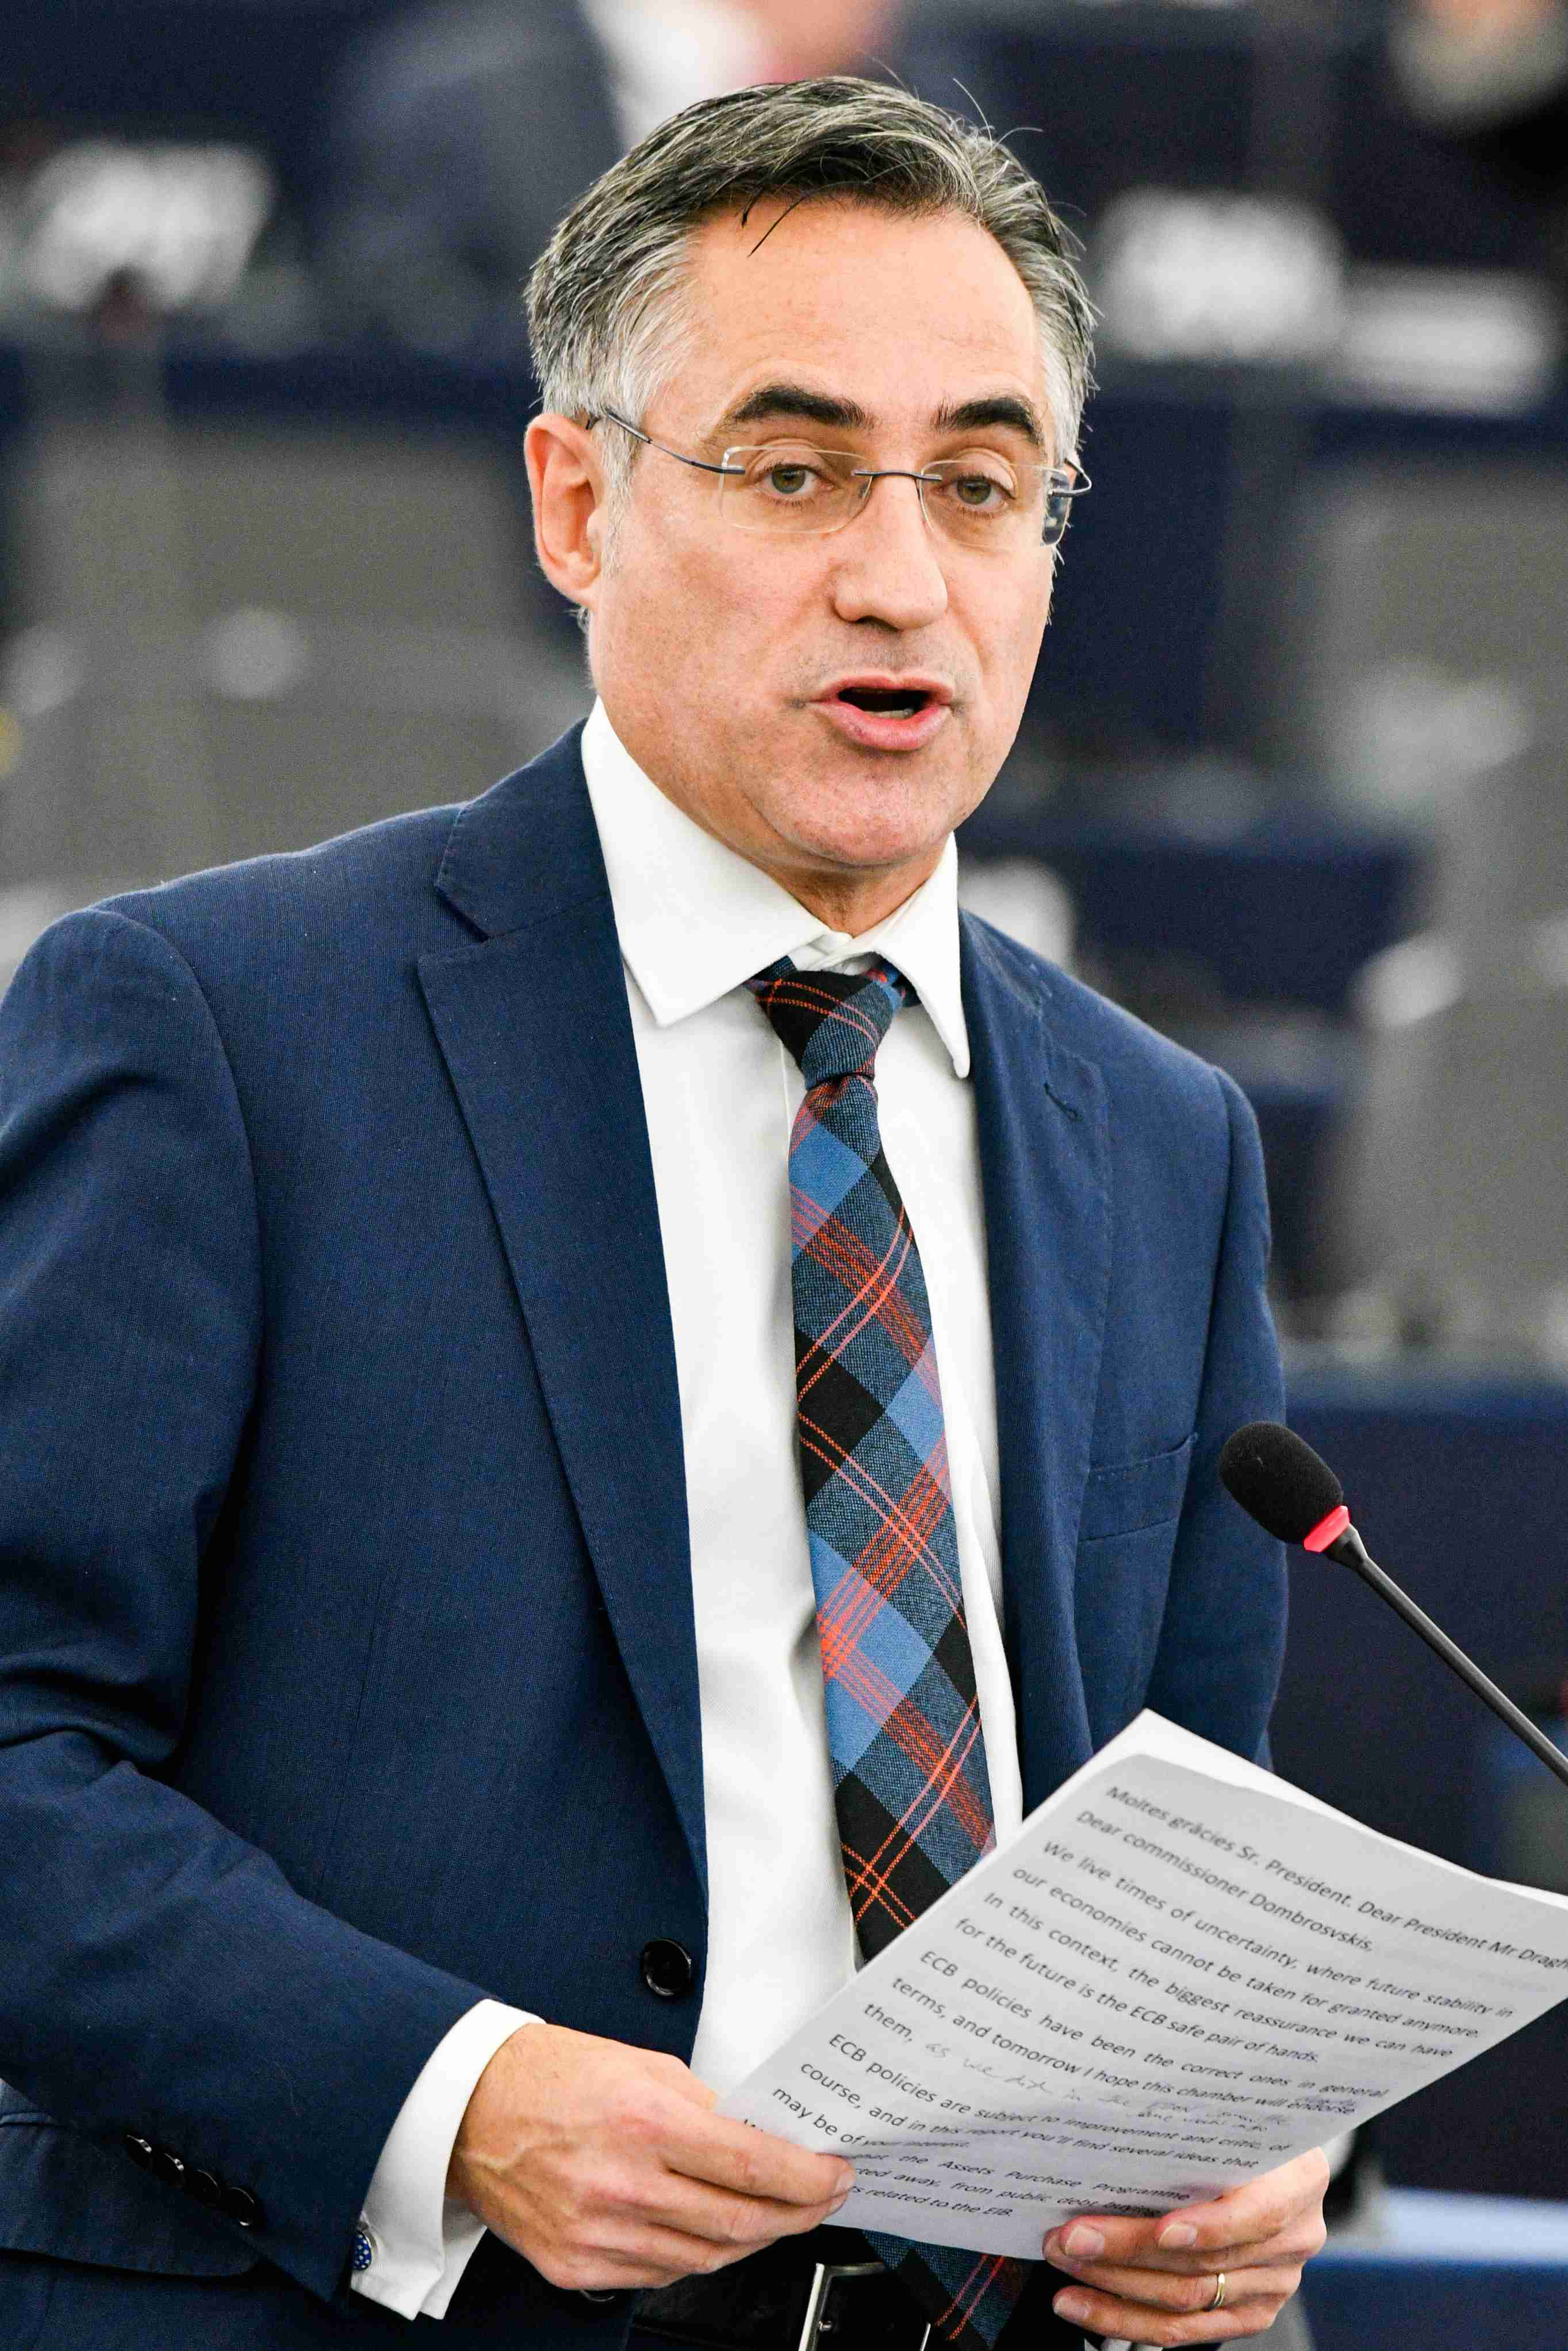 MEP's question to the European Commission about the imprisonment of Sànchez and Cuixart